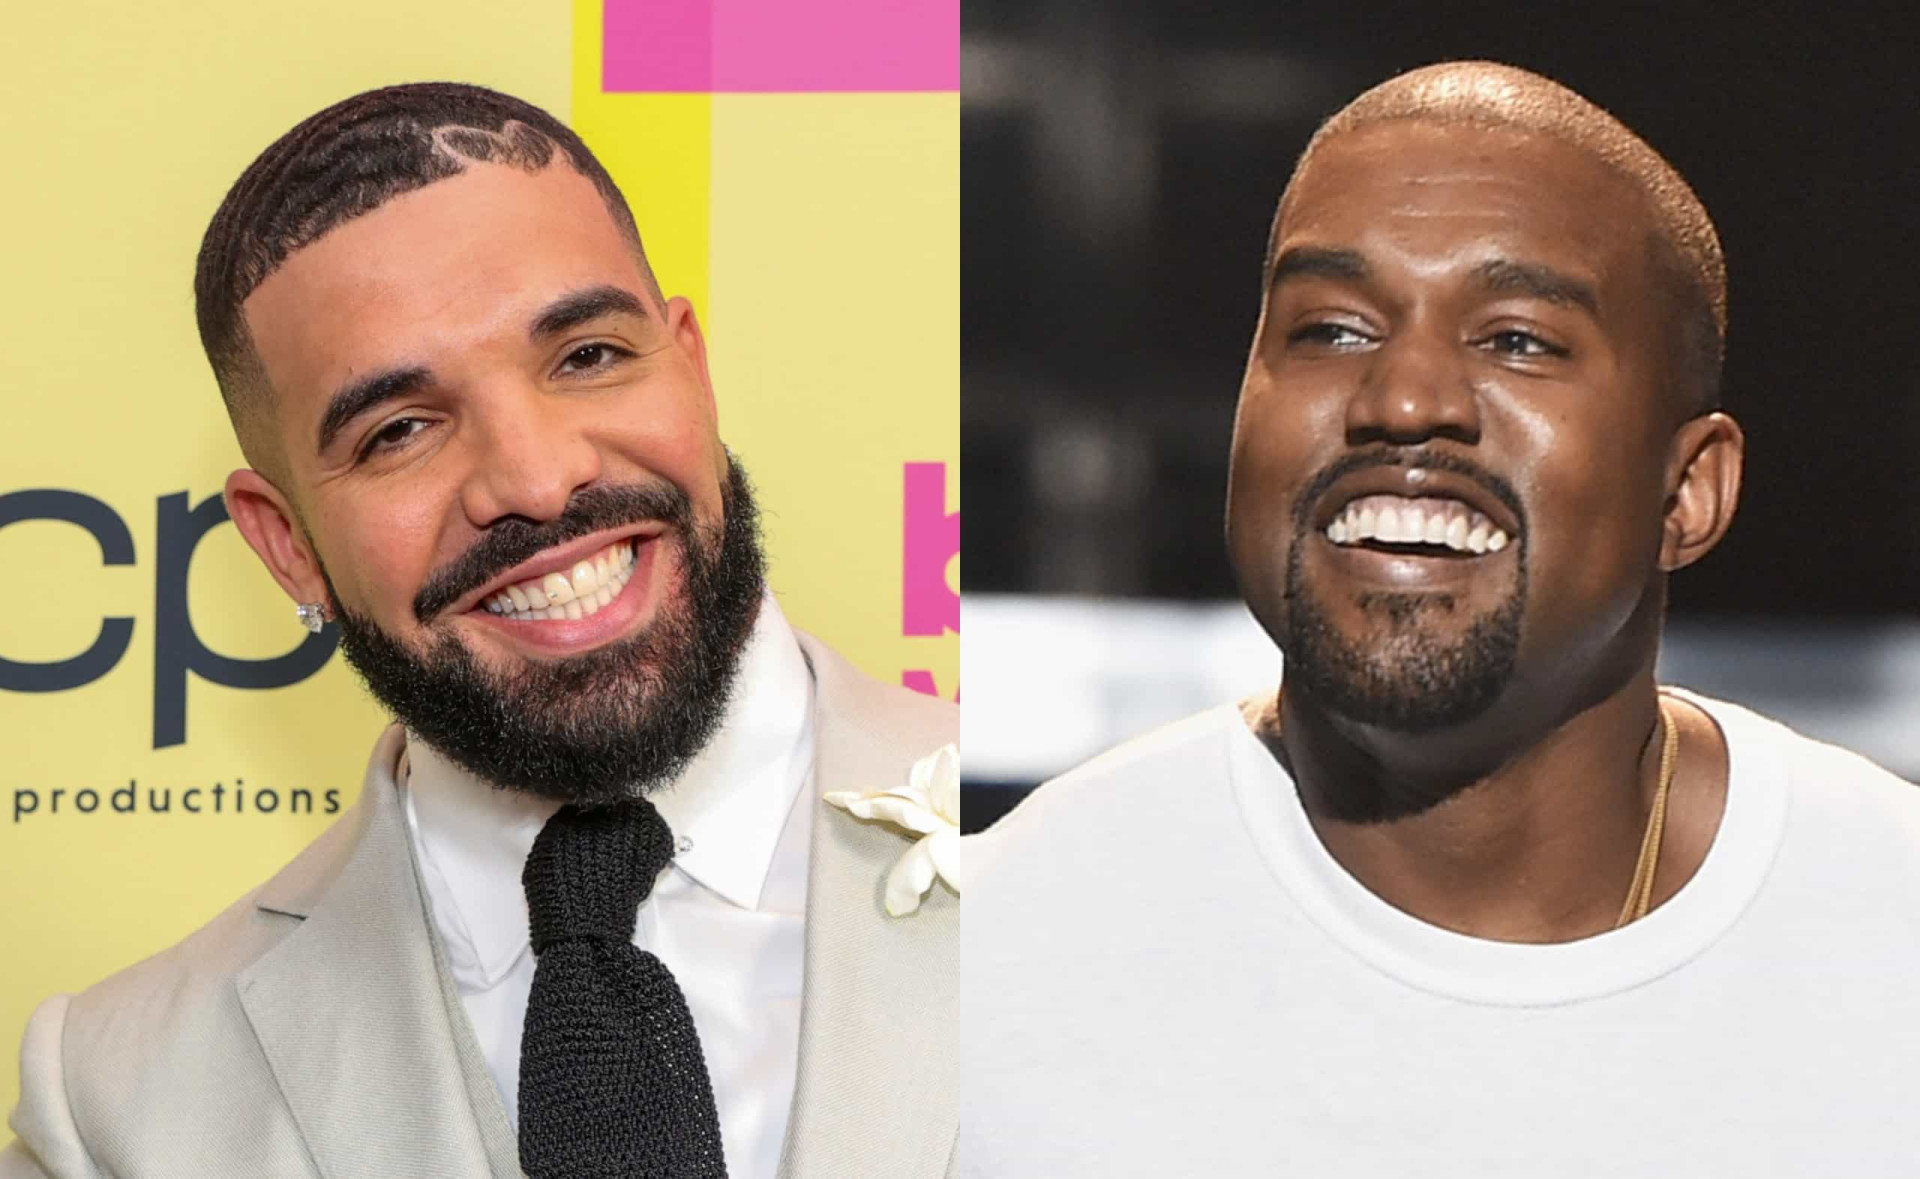 <p>Drake and Kanye West have had a strained relationship. They have exchanged words on social media and in their songs, and their feud intensified in 2021. West attempted to coincide the release of his album 'Donda' with Drake's album 'Certified Lover Boy', leading Drake to respond in a Trippie Red song. They seemed to bury the hatchet towards the end of the year, but it didn't last for long. </p><p><a href="https://www.msn.com/en-us/community/channel/vid-7xx8mnucu55yw63we9va2gwr7uihbxwc68fxqp25x6tg4ftibpra?cvid=94631541bc0f4f89bfd59158d696ad7e">Follow us and access great exclusive content every day</a></p>